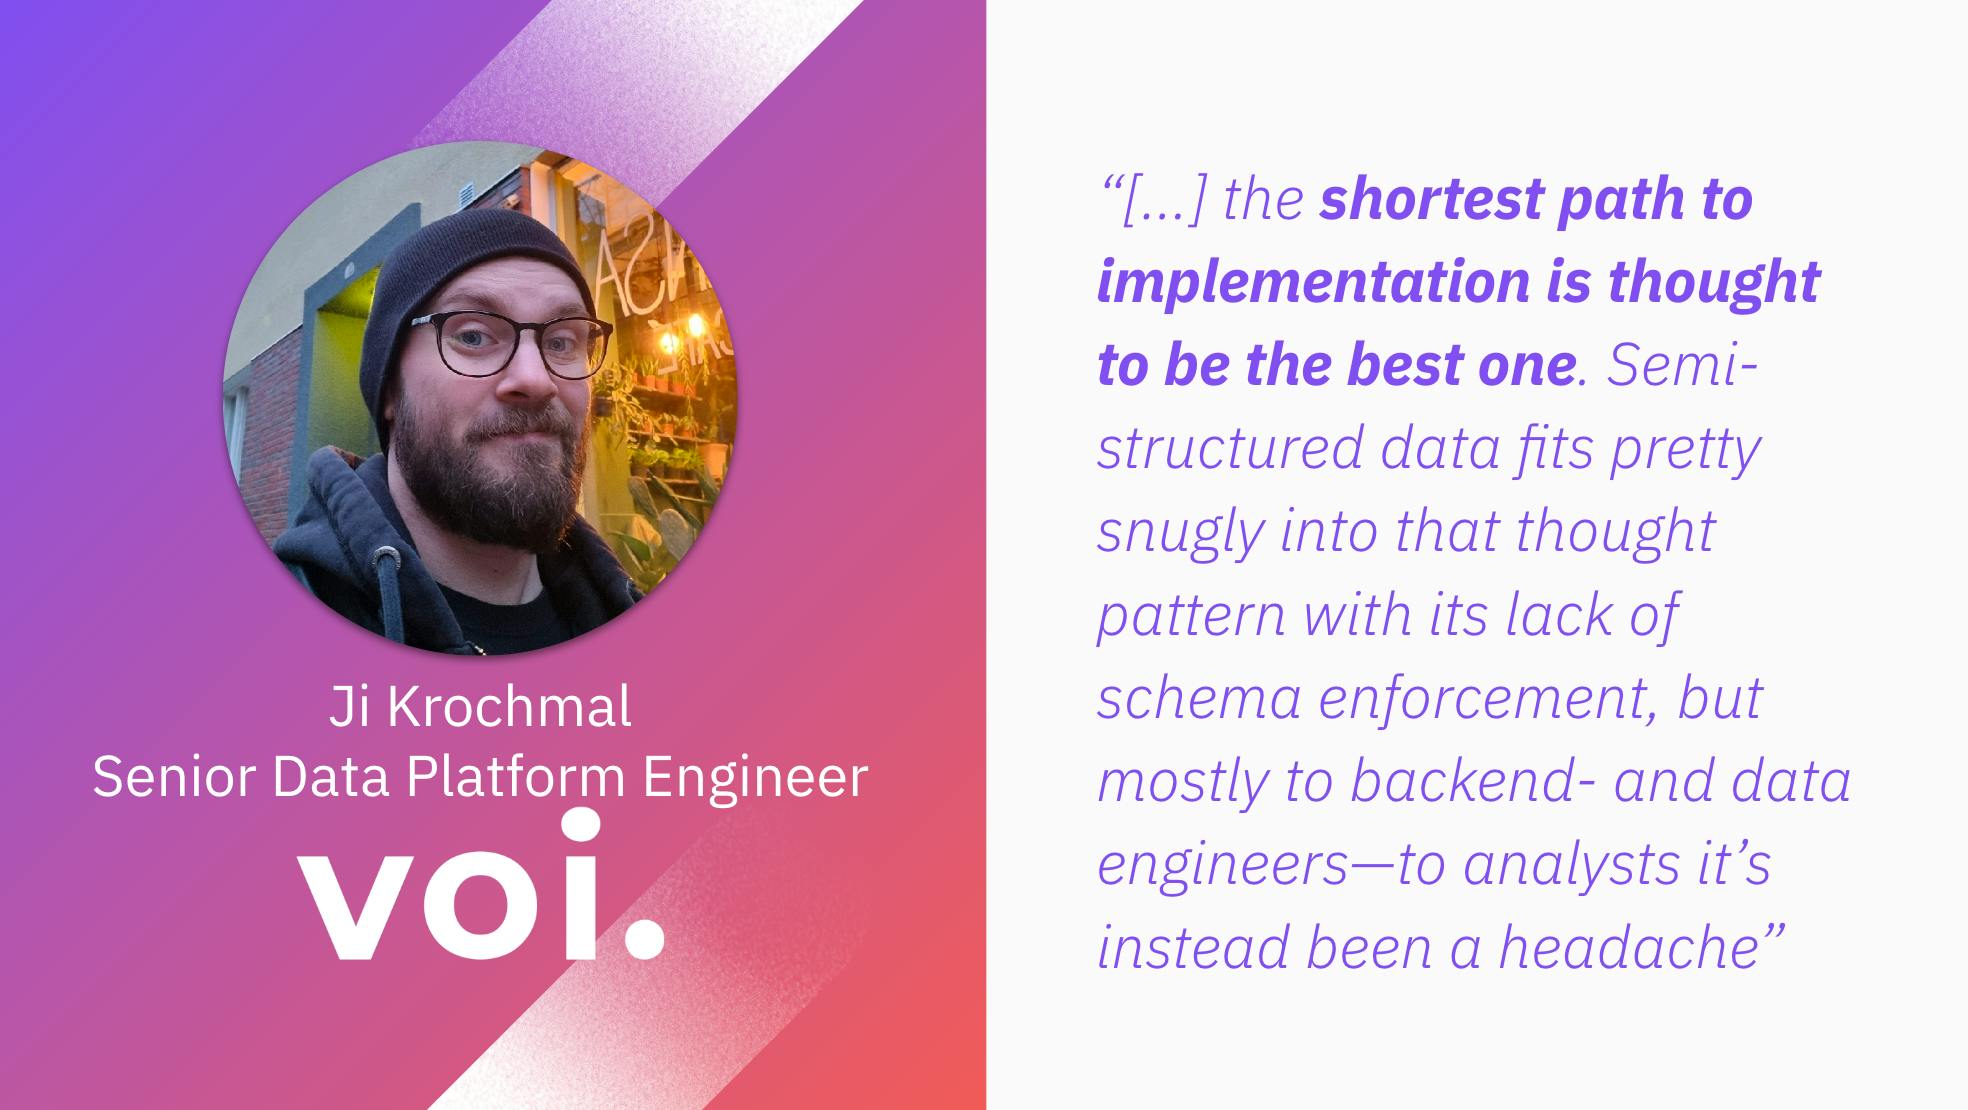 Ji Krochmal, Senior Data Platform Engineer at Voi: "...the shortest path to implementation is thought to be the best one. Semi-structured data fits pretty snugly info that thought pattern with its lack of schema enforcement, but mostly to backend- and data engineers-to analysts it's instead been a headache."